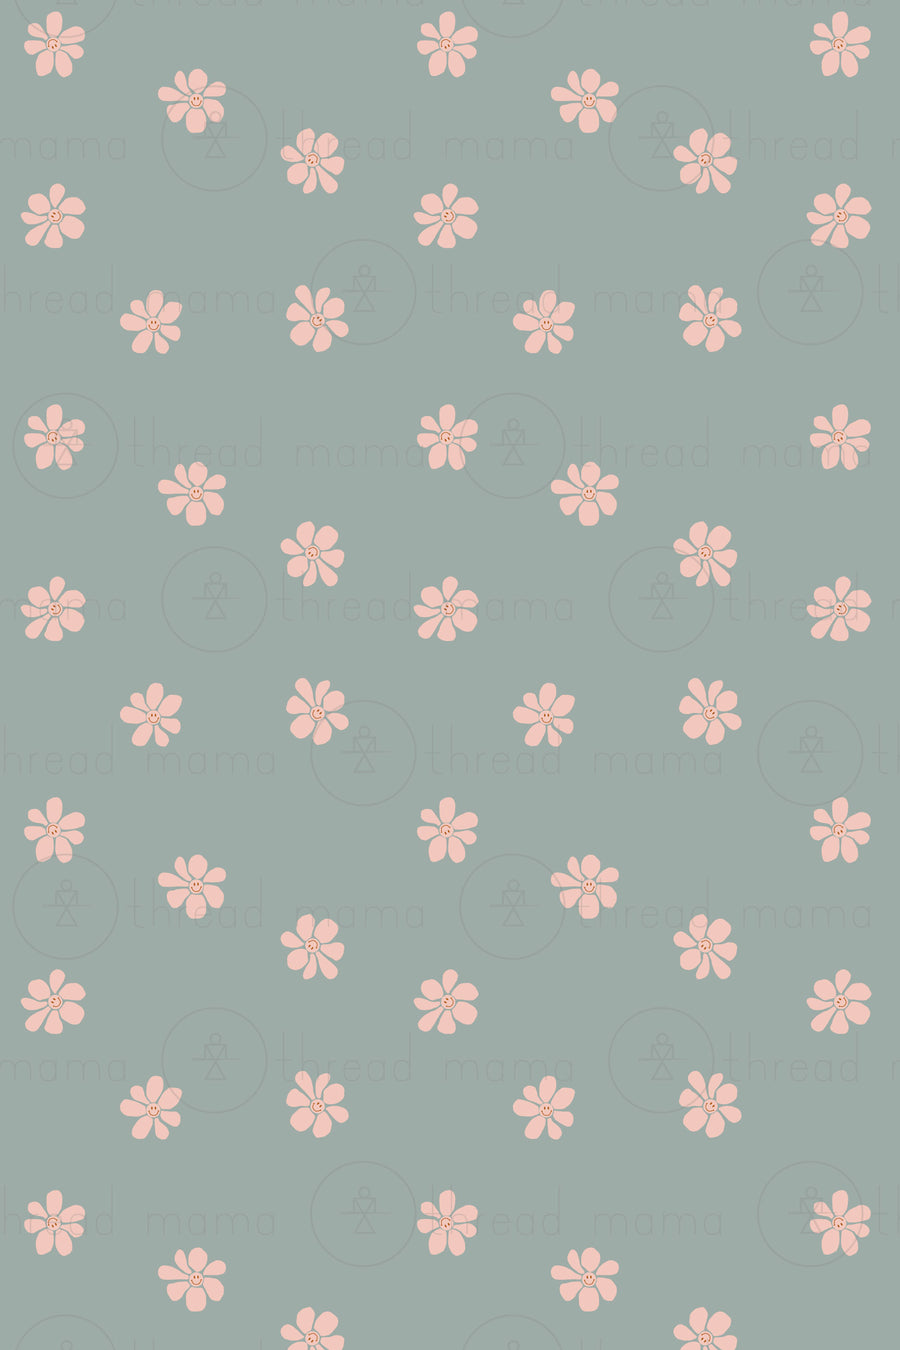 Repeating Pattern 191 (Seamless)